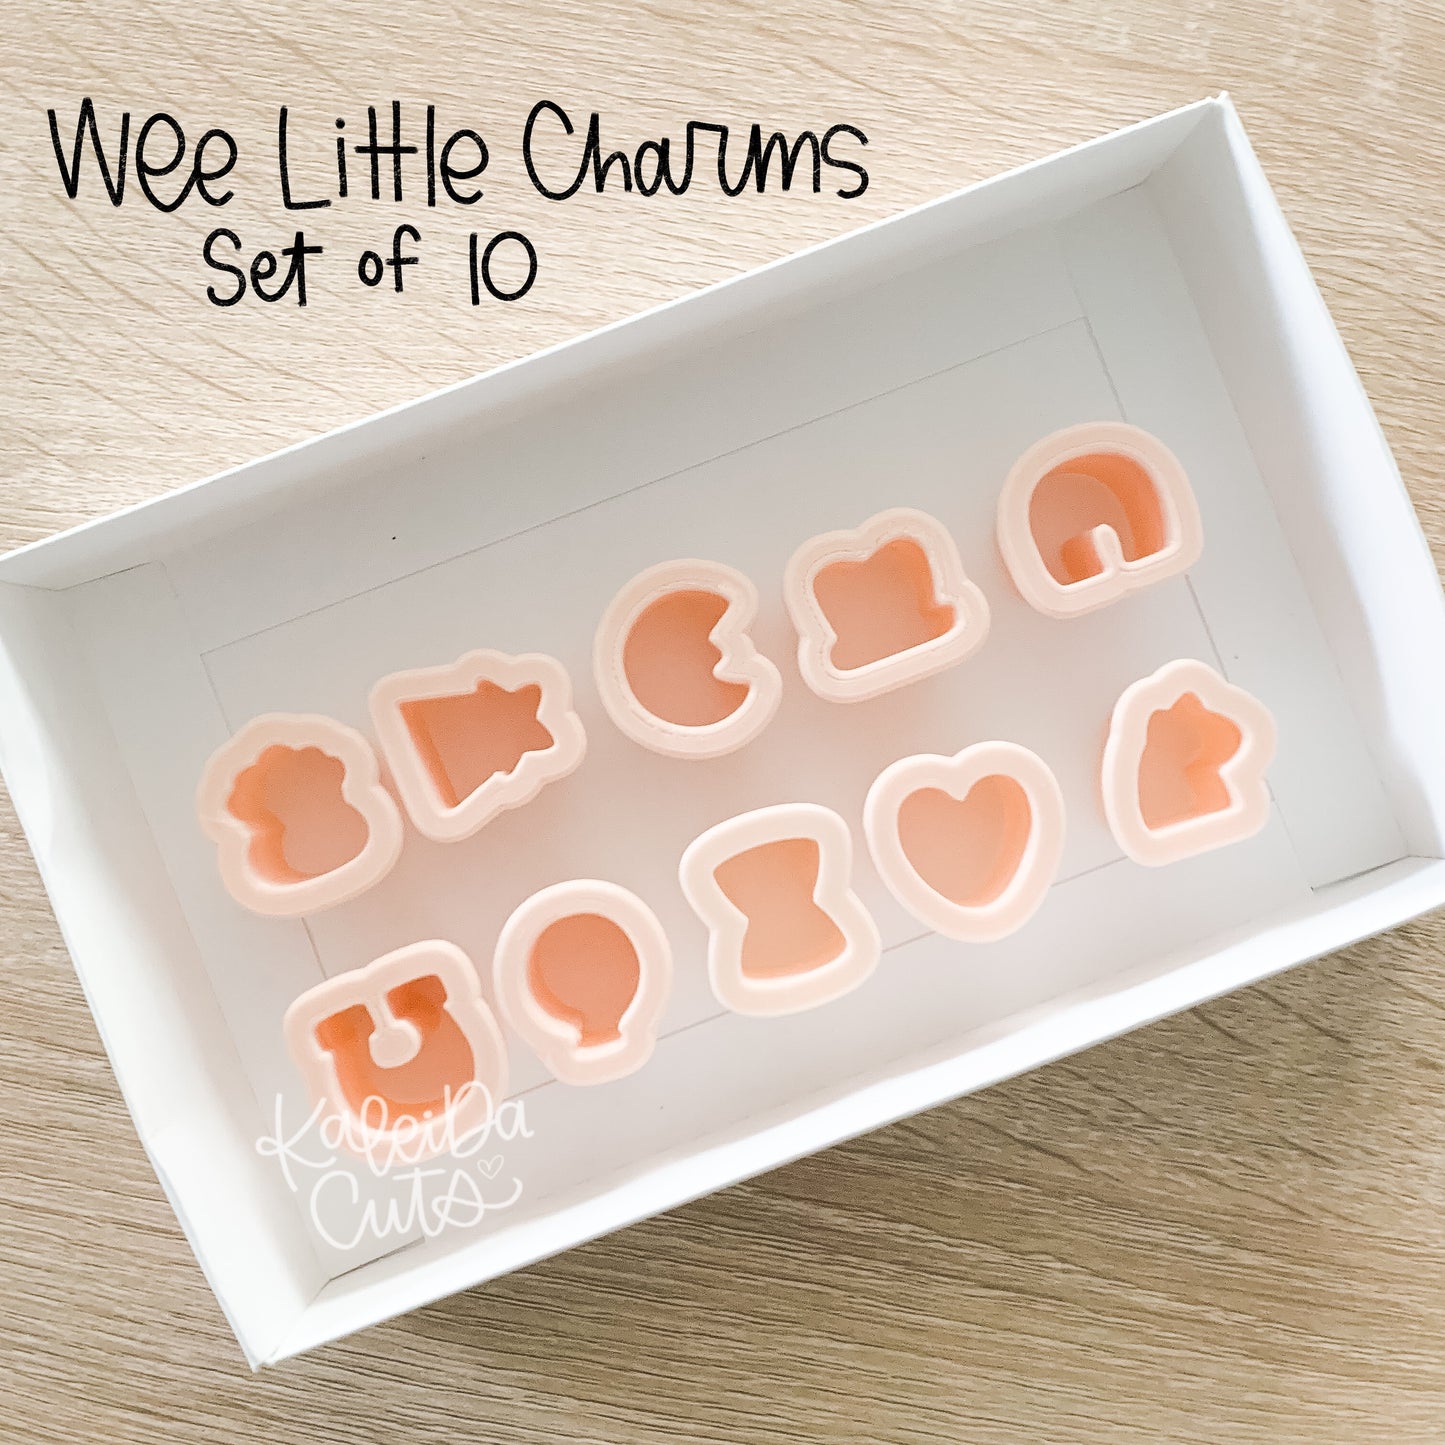 Wee Little Charm Cookie Cutter Set of 10